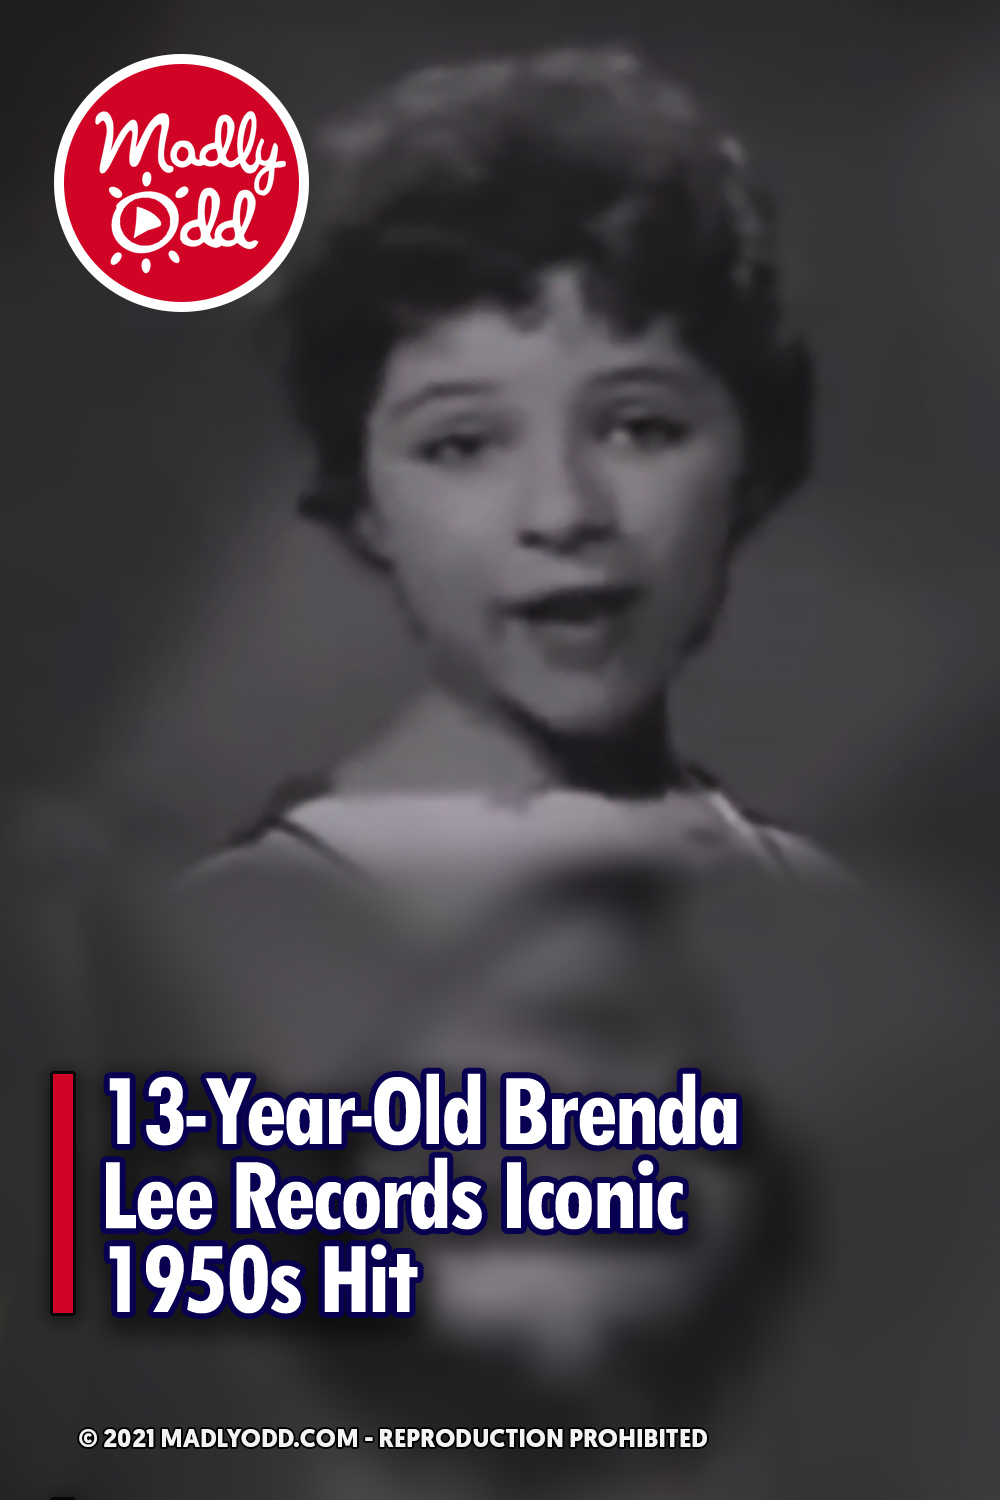 13-Year-Old Brenda Lee Records Iconic 1950s Hit